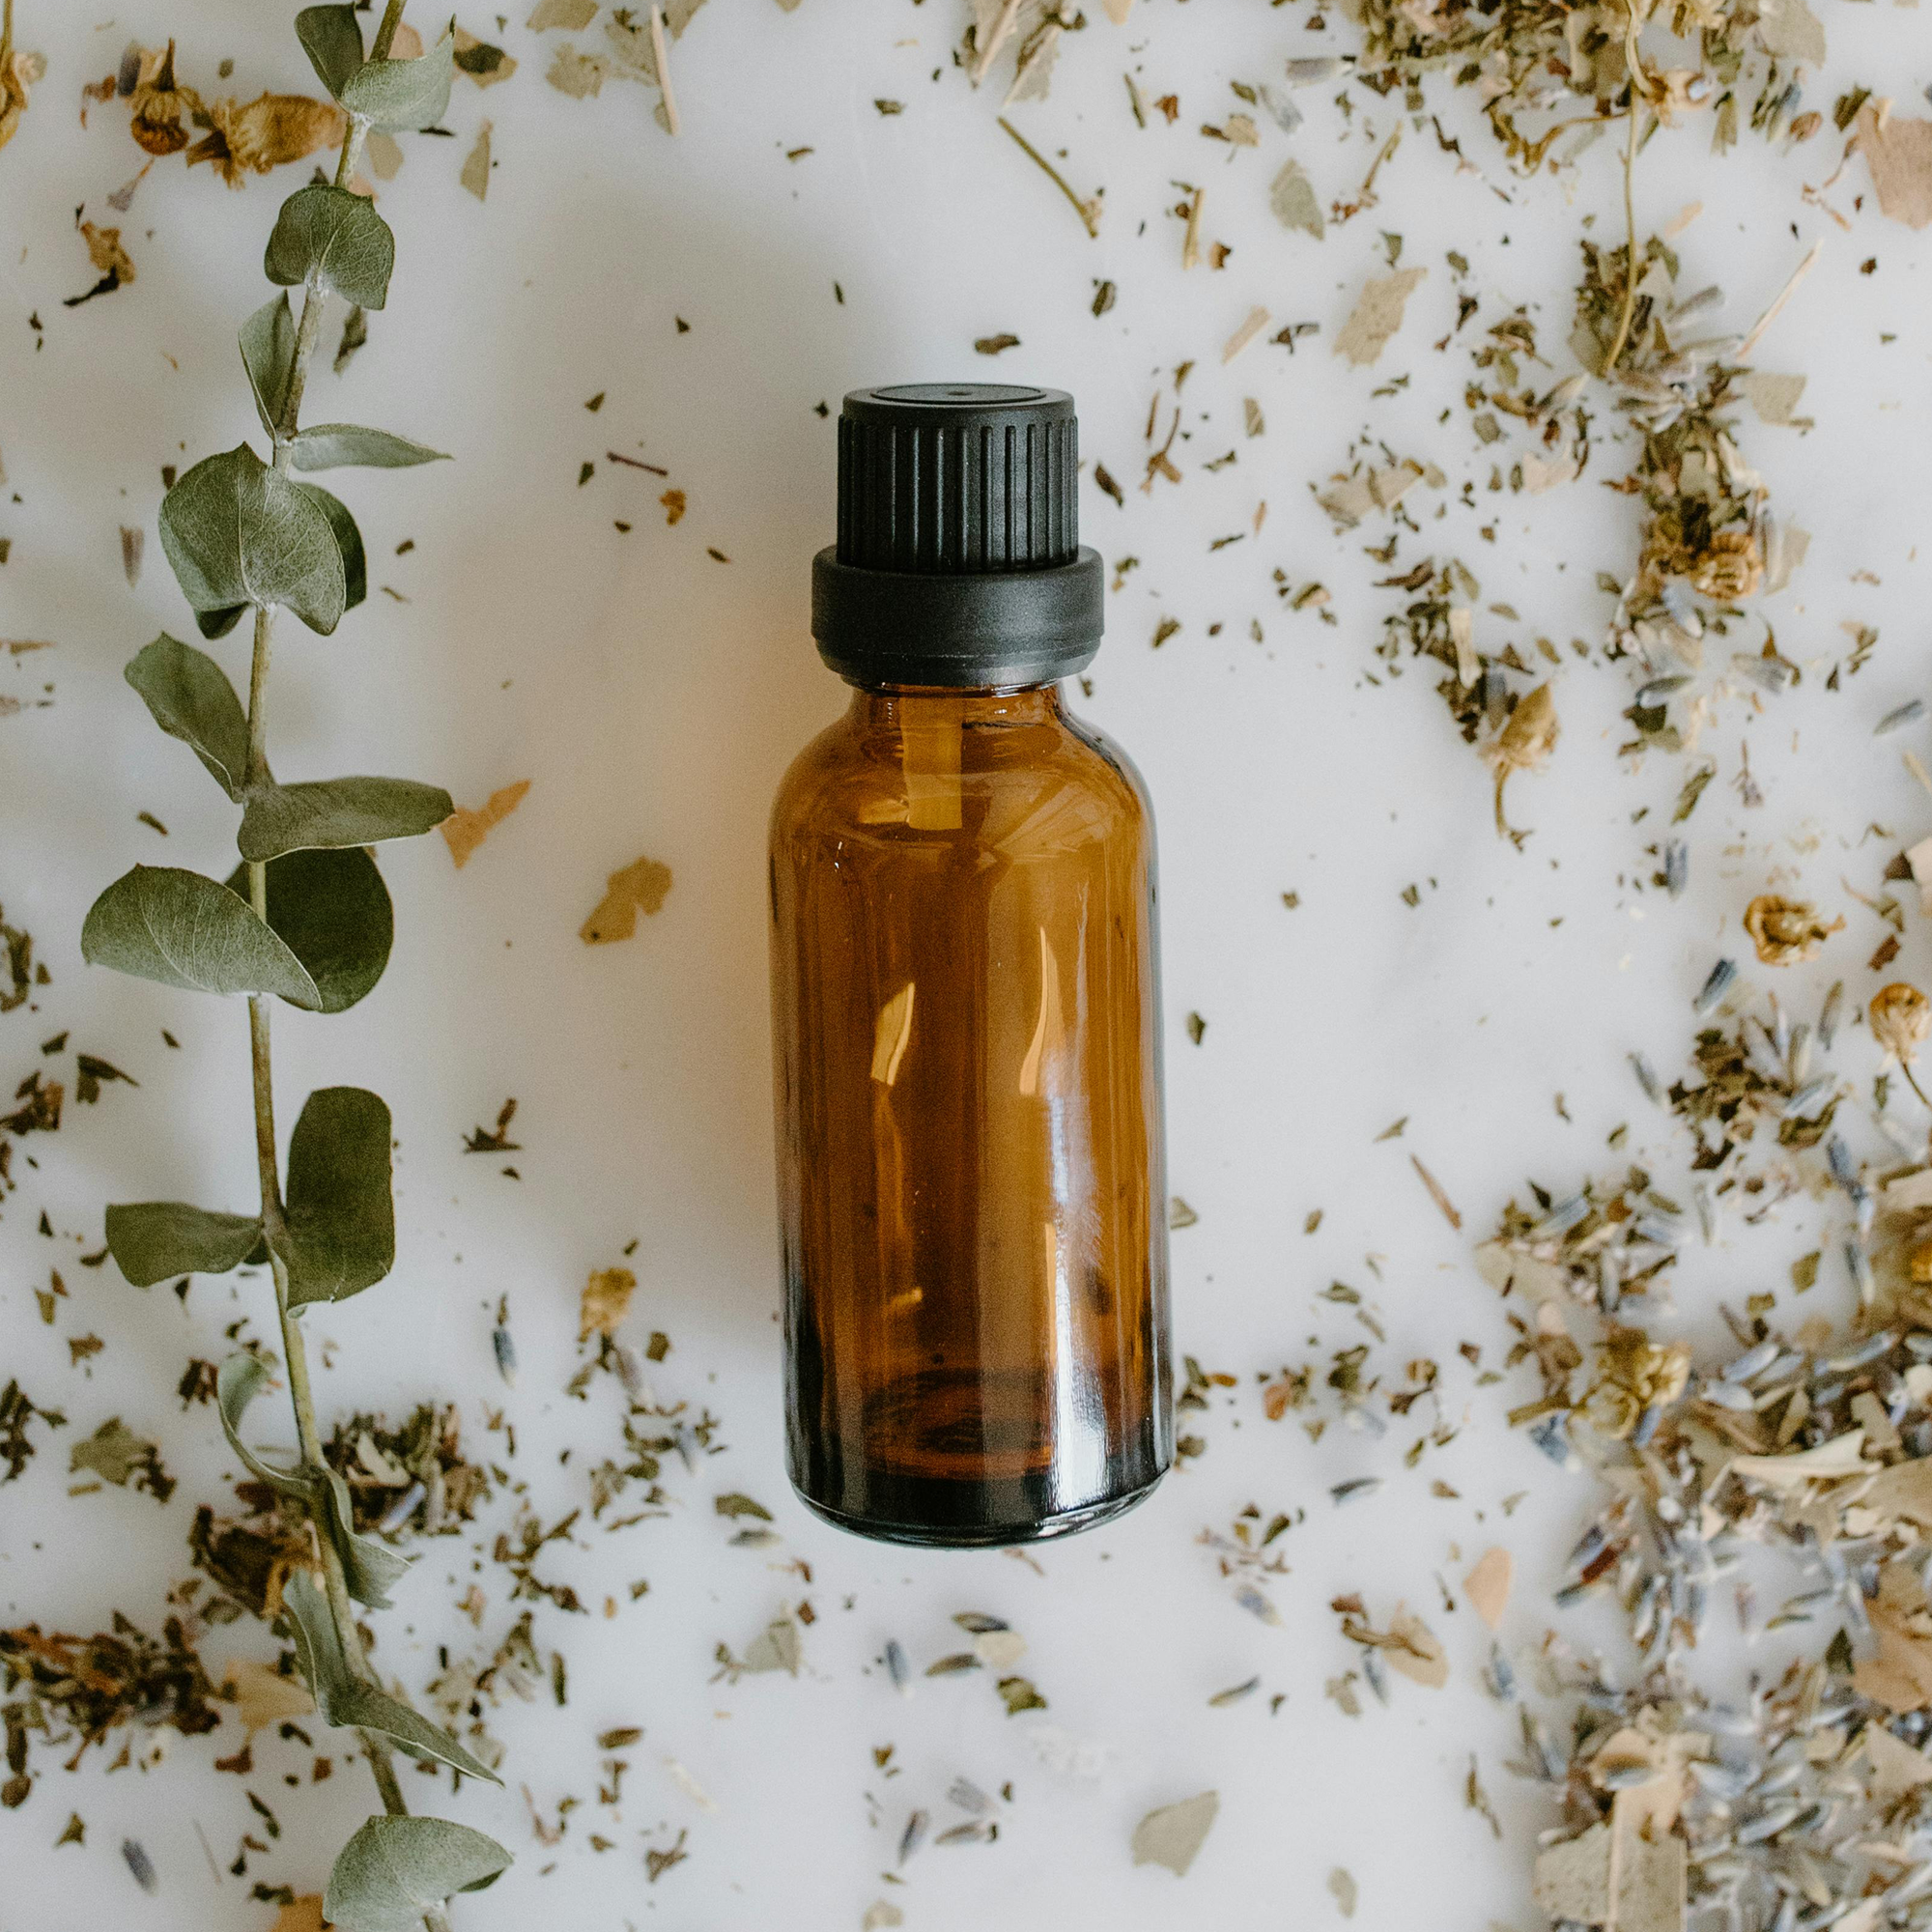 College Aromatherapy: Using Essential Oils to Adjust to Dorm Living